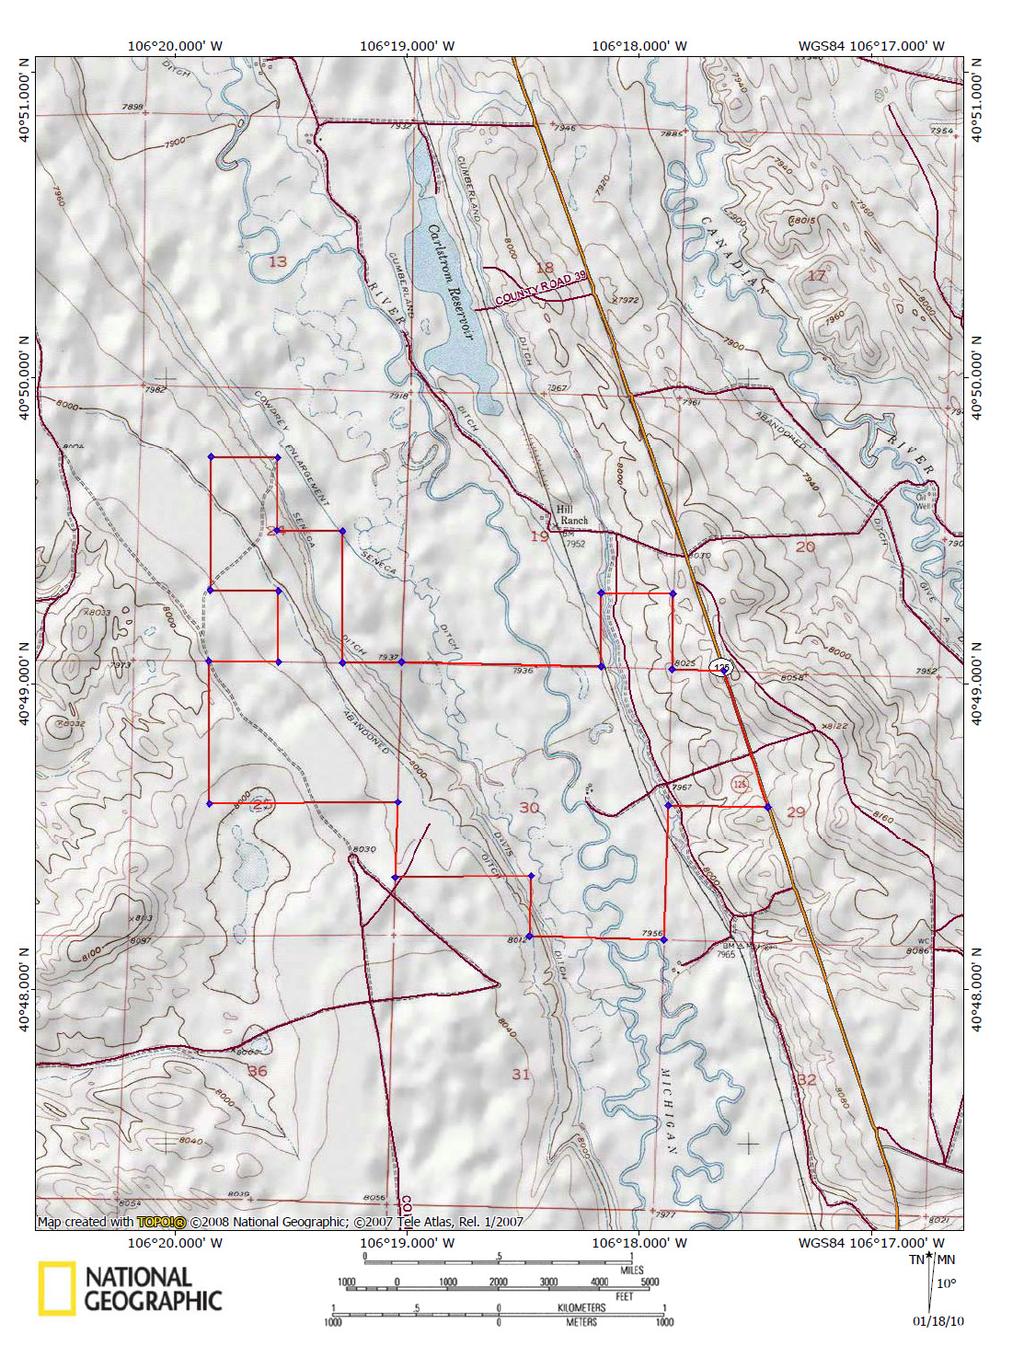 DOUBLE M RANCH BOUNDARY MAP Boundary Map is provided for reference